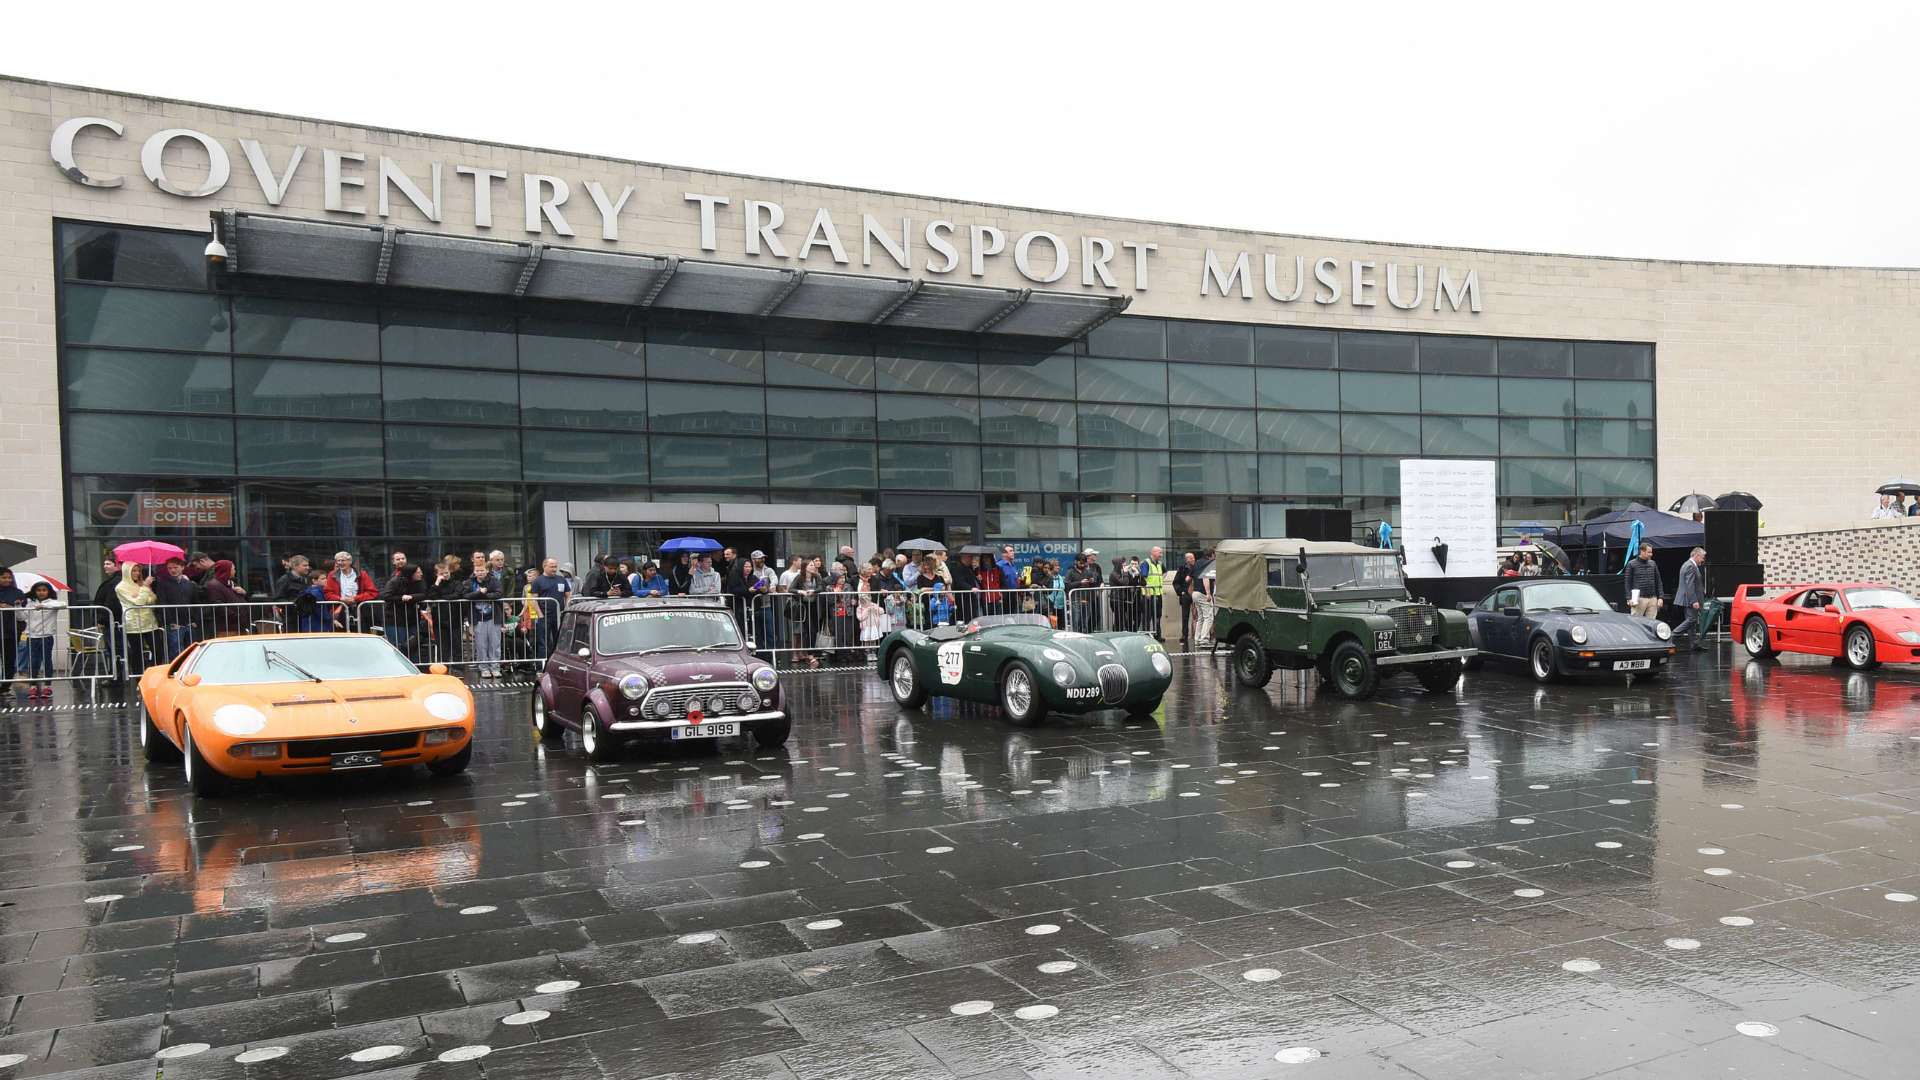 A variety of cars, from classic to very modern sleek vehicles, are parked in front of a large building with a glass front. You can tell it's a gloomy day from the rain on the ground